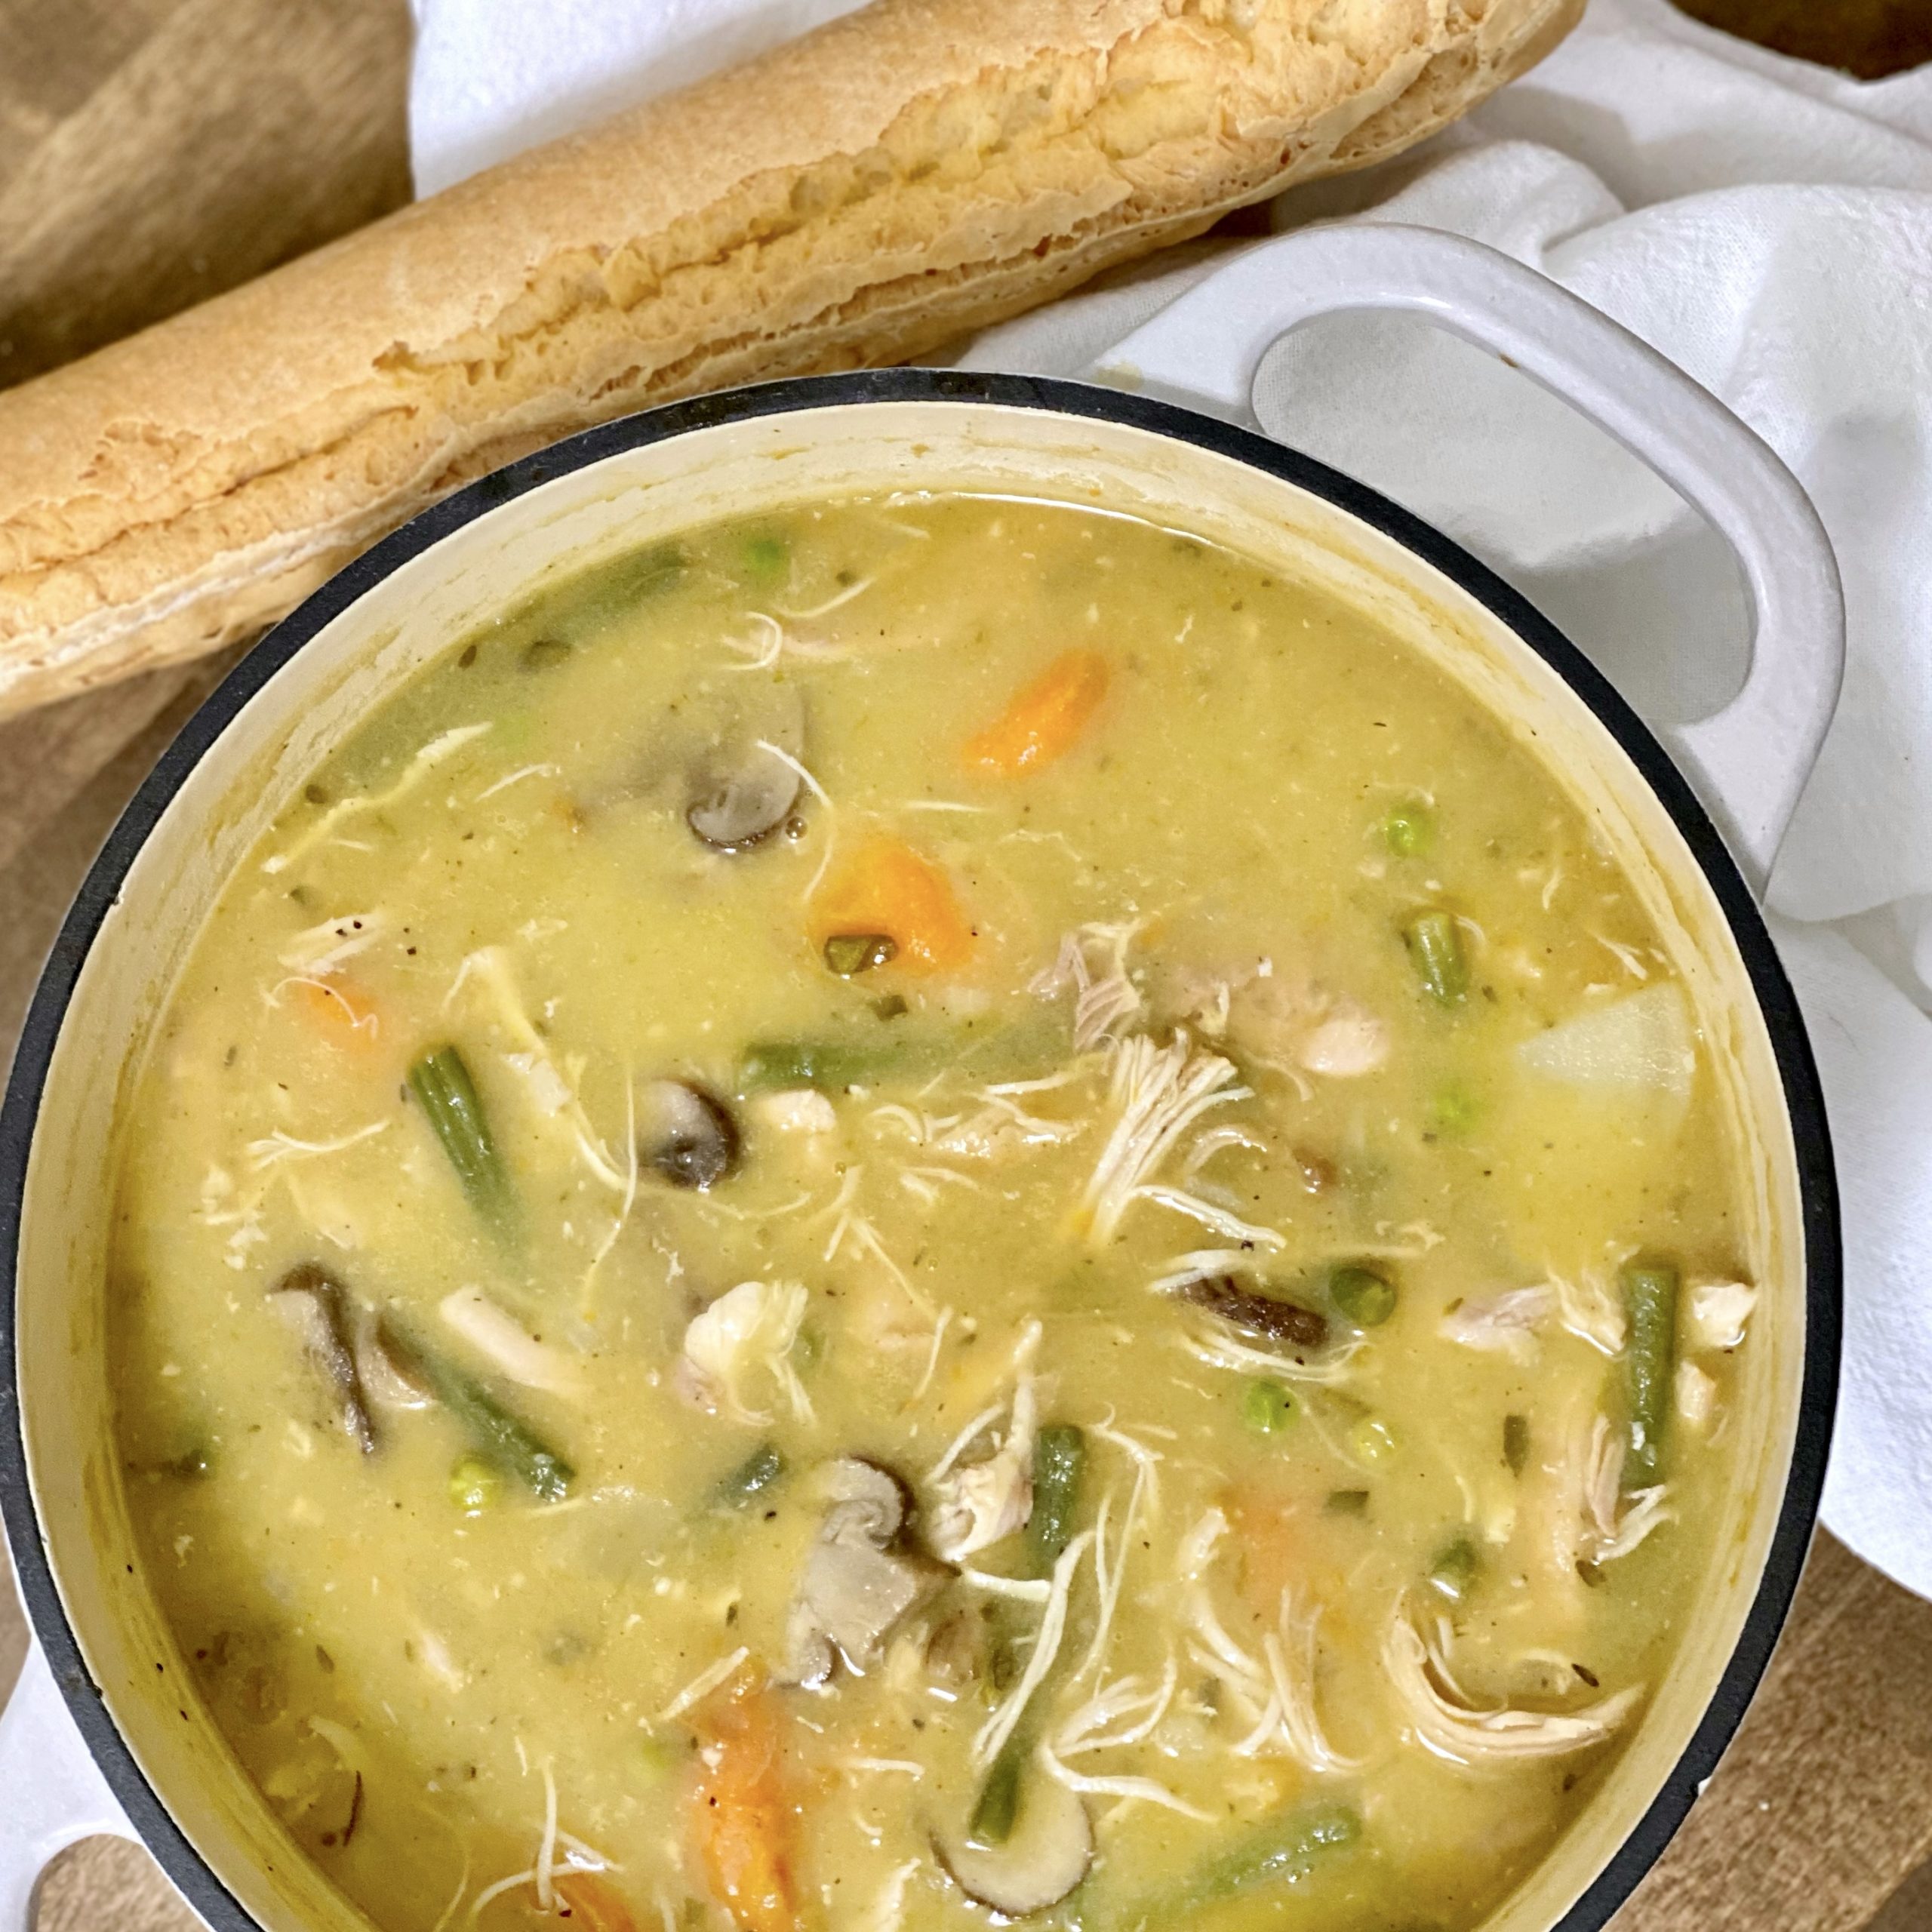 Savory Chicken Stew in a pot with a baguette next to it.